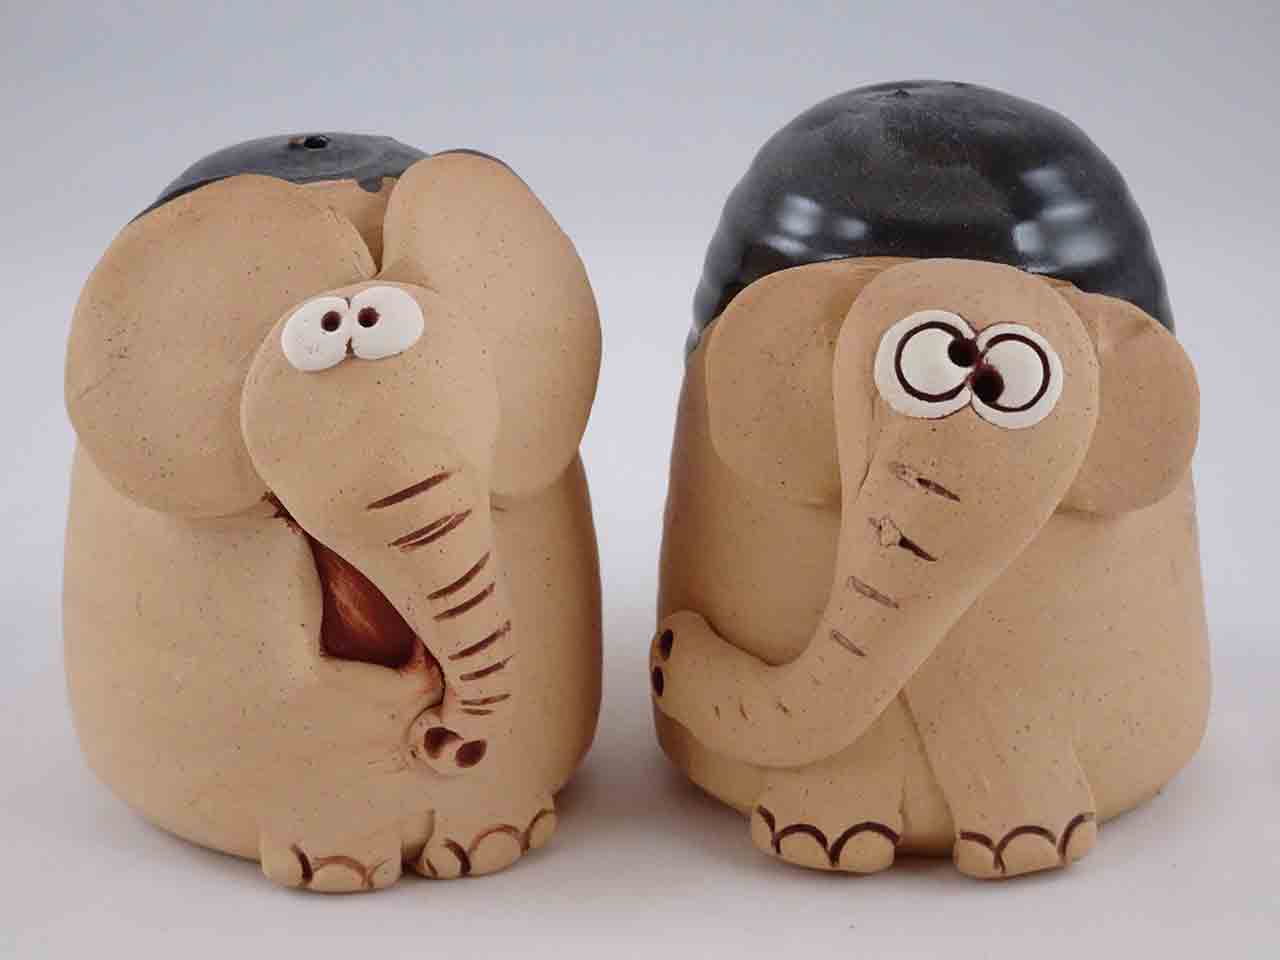 Pretty Ugly Pottery from Wales salt and pepper shakers - elephants